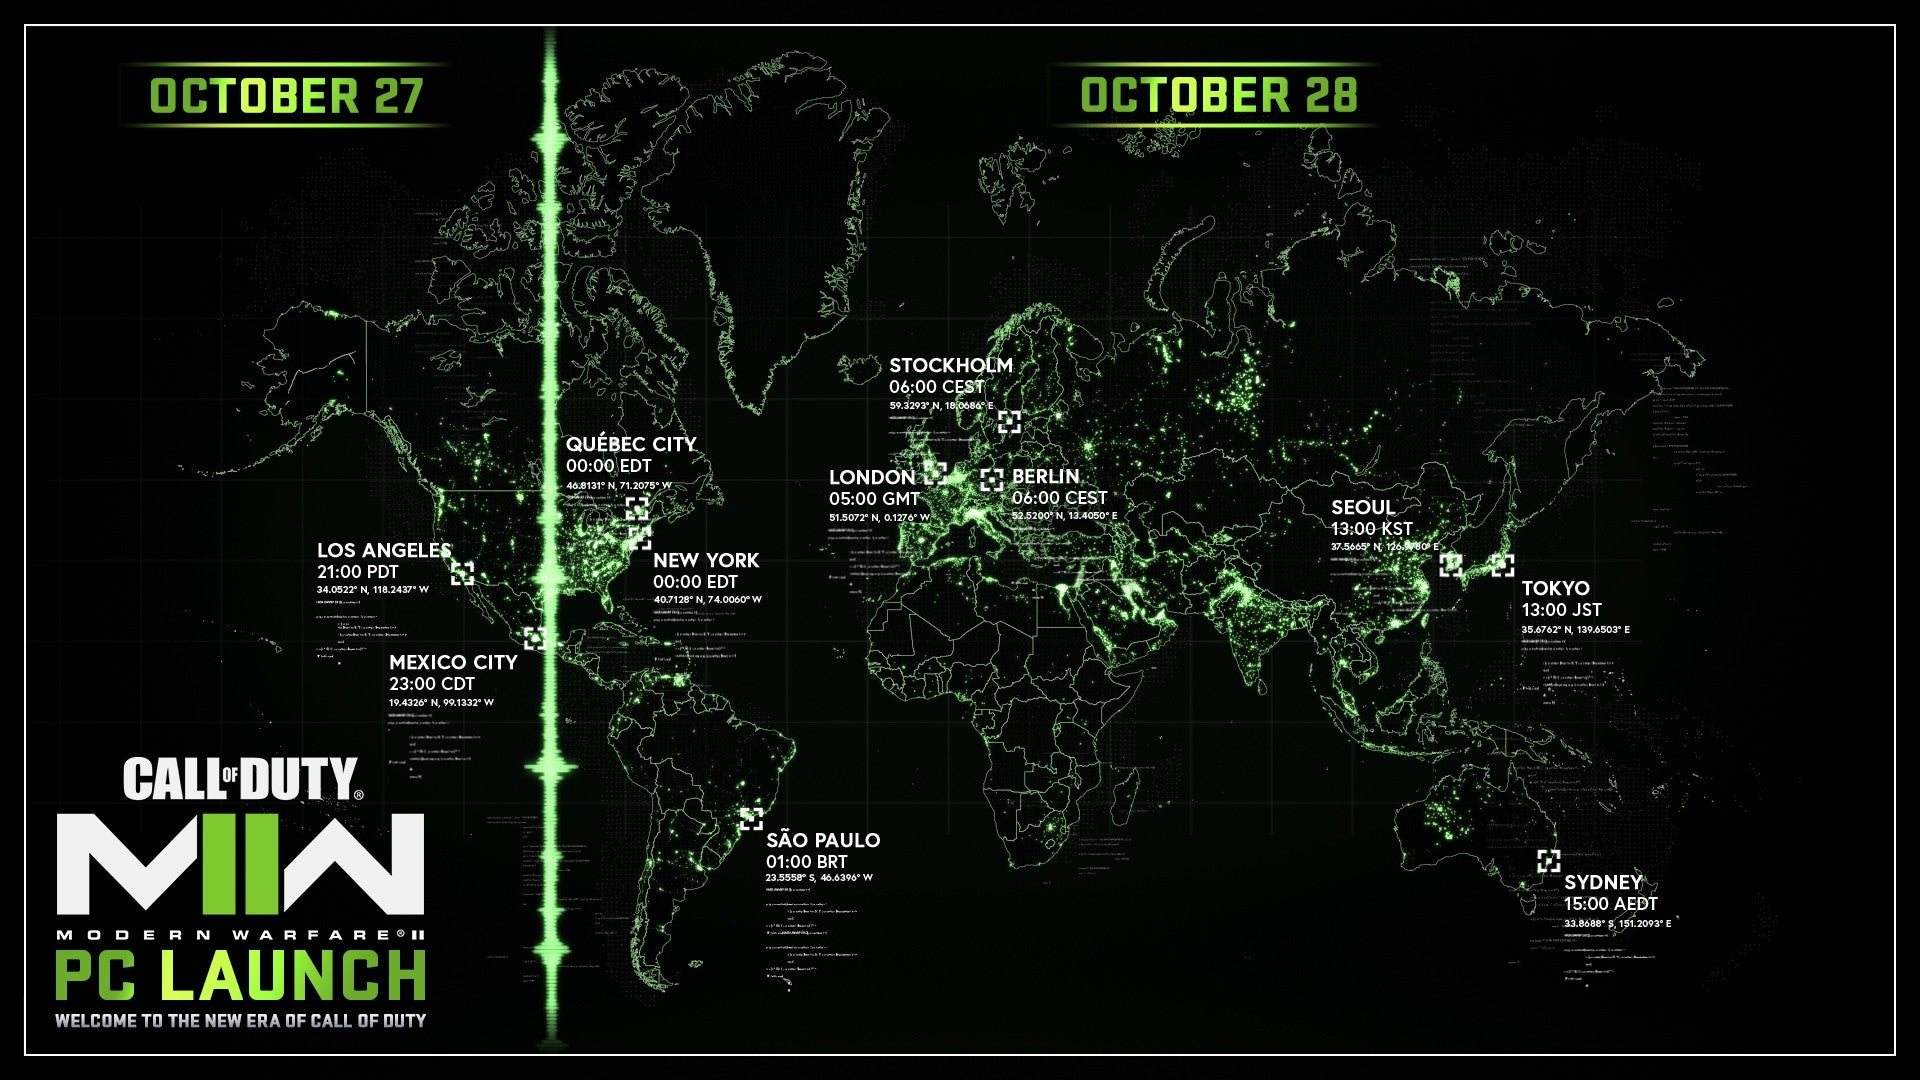 Image showing Modern Warfare 2 launch times on PC in various regions on a map.